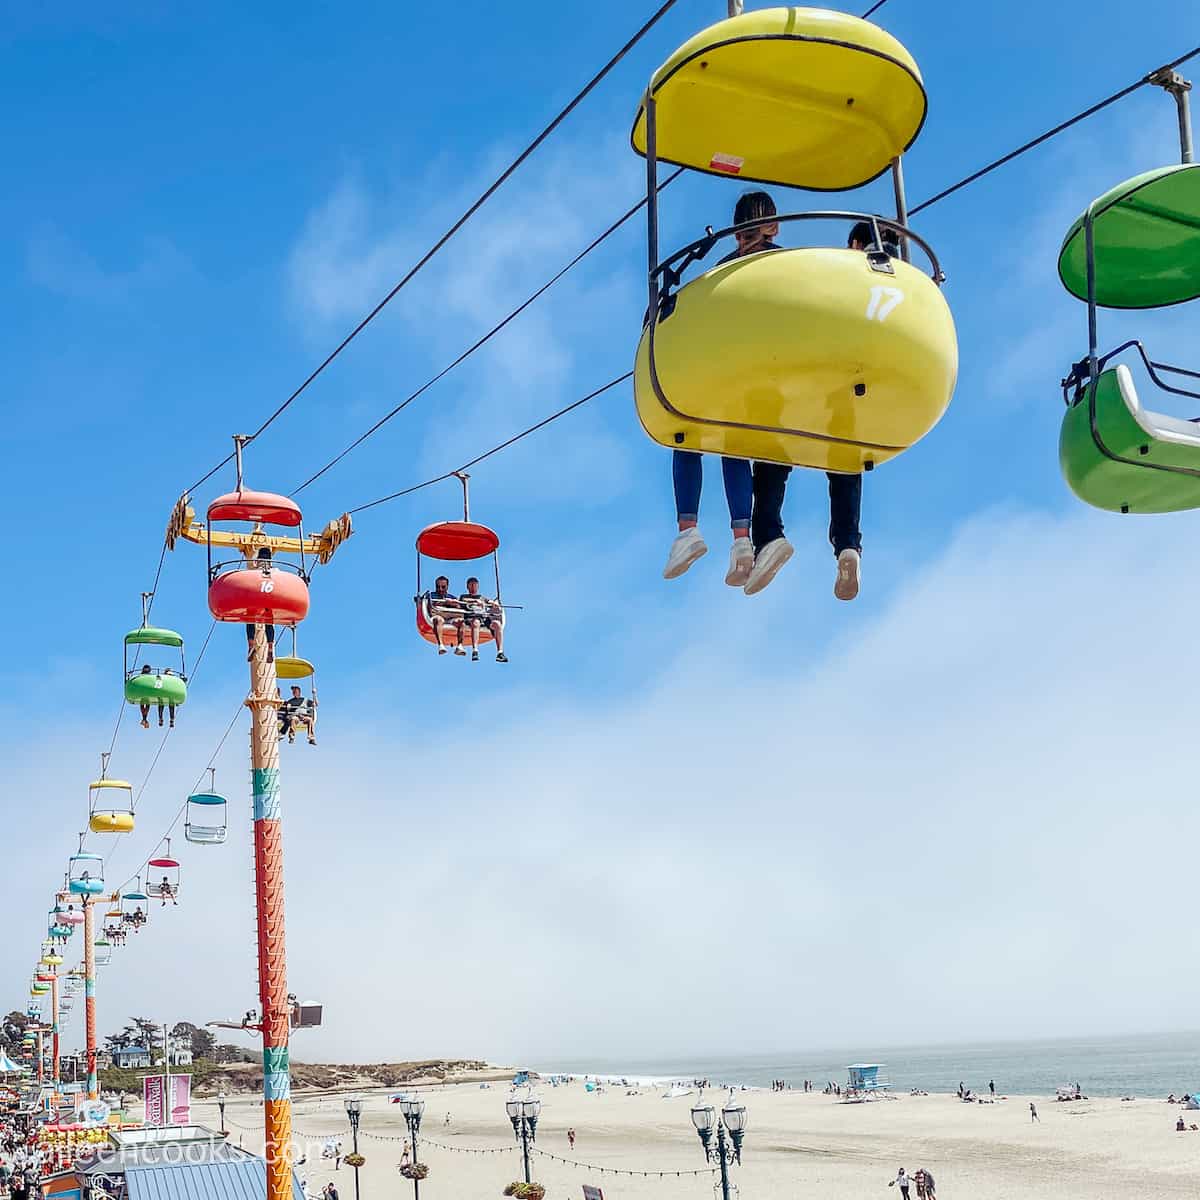 The sky flyer ride at the beach boardwalk, over the beach.